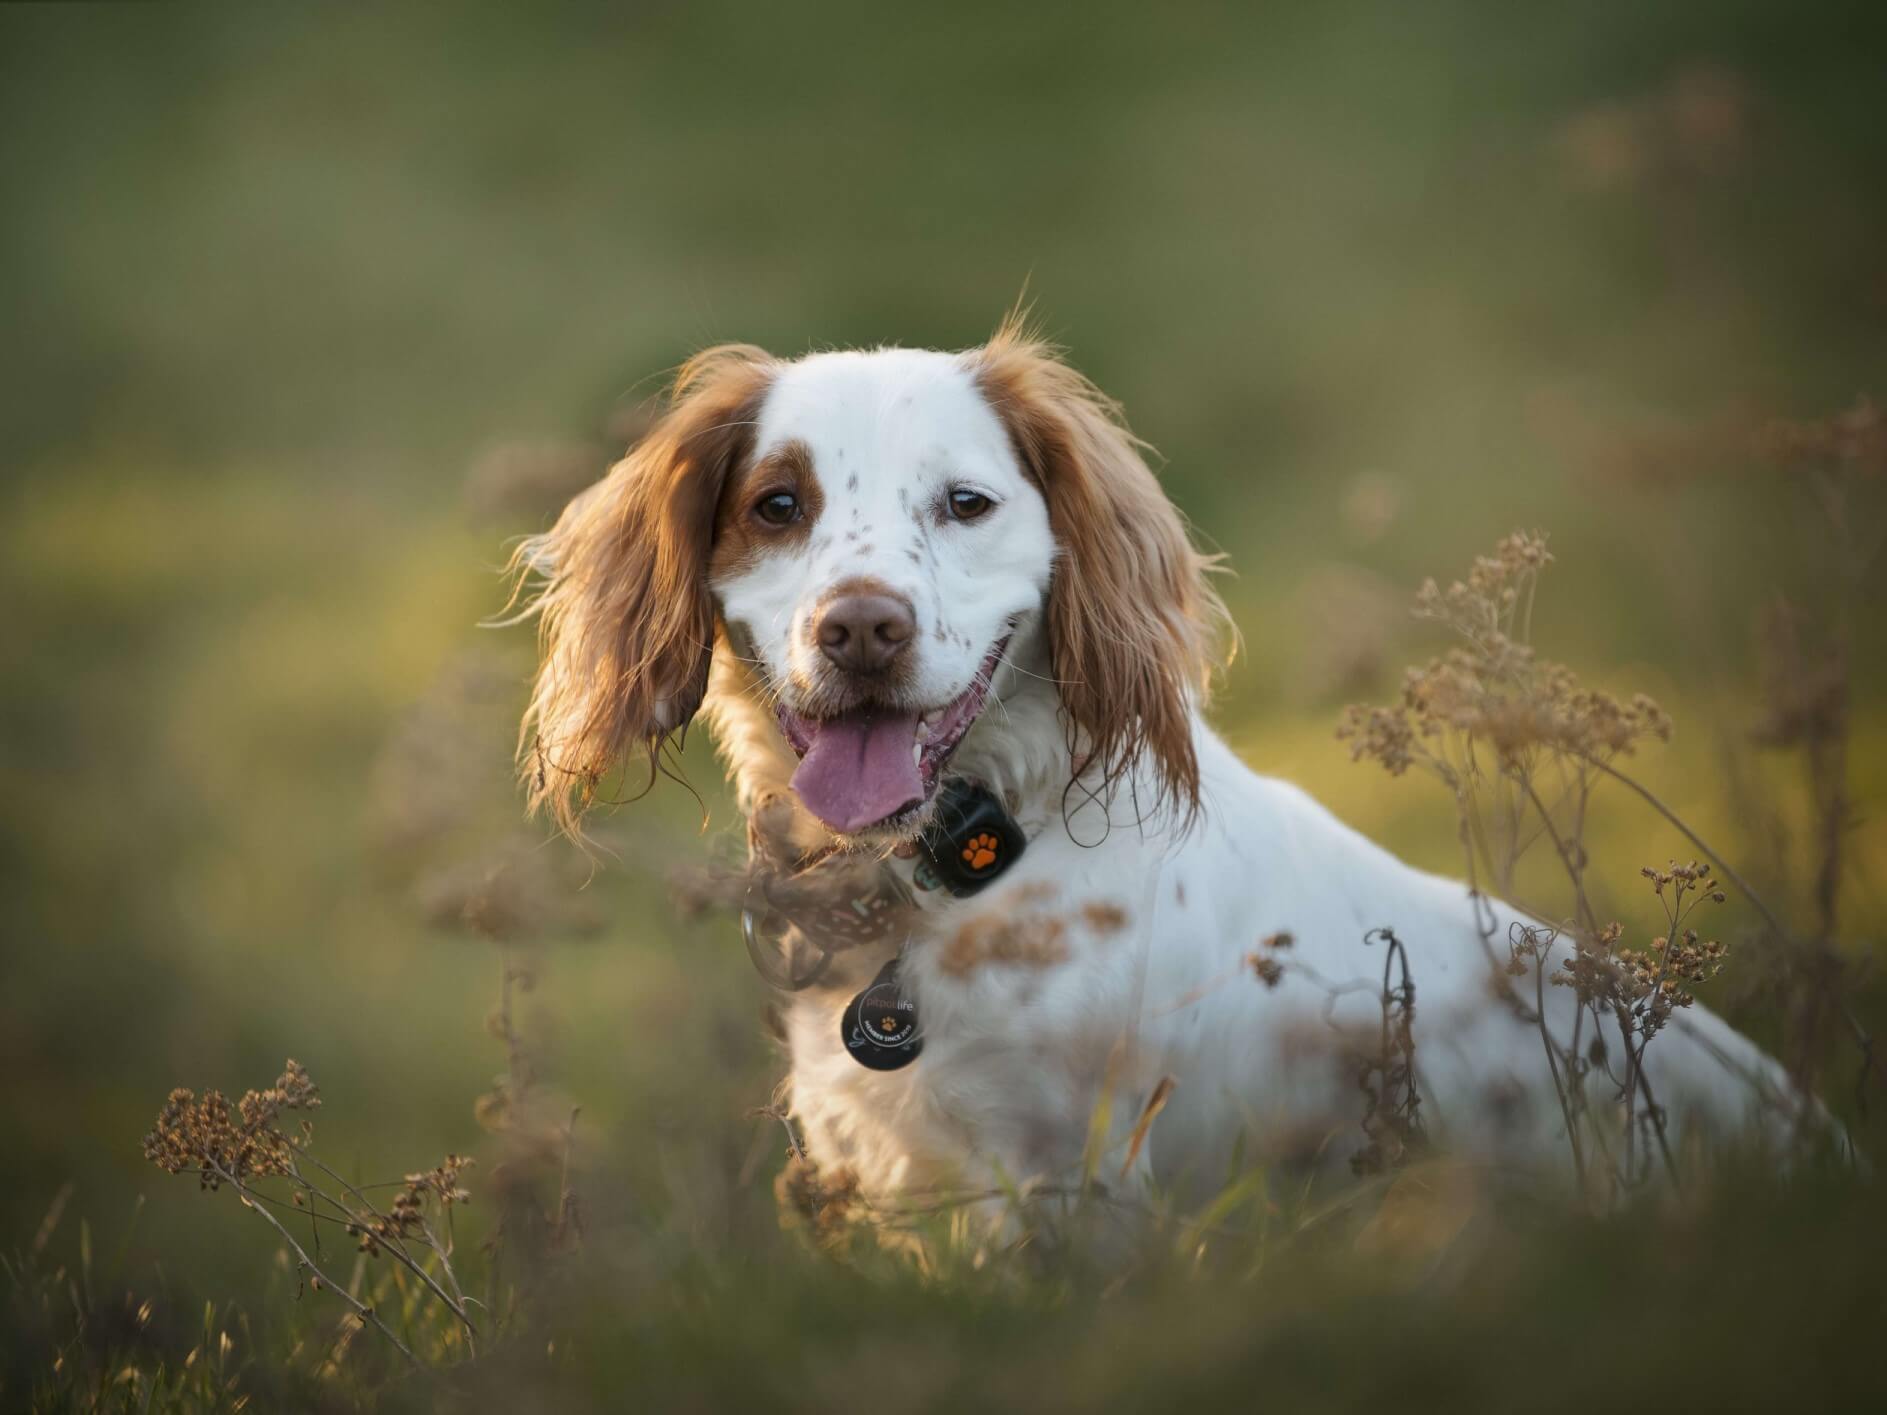 https://www.pitpat.com/wp-content/uploads/2020/08/Dog_-rights_MS_outdoors_stationary_-sitting-with-PitPat-life-membership-tag-on-collar_tongue-out_cocker-spaniel_@grumpycocker-1-1.jpg